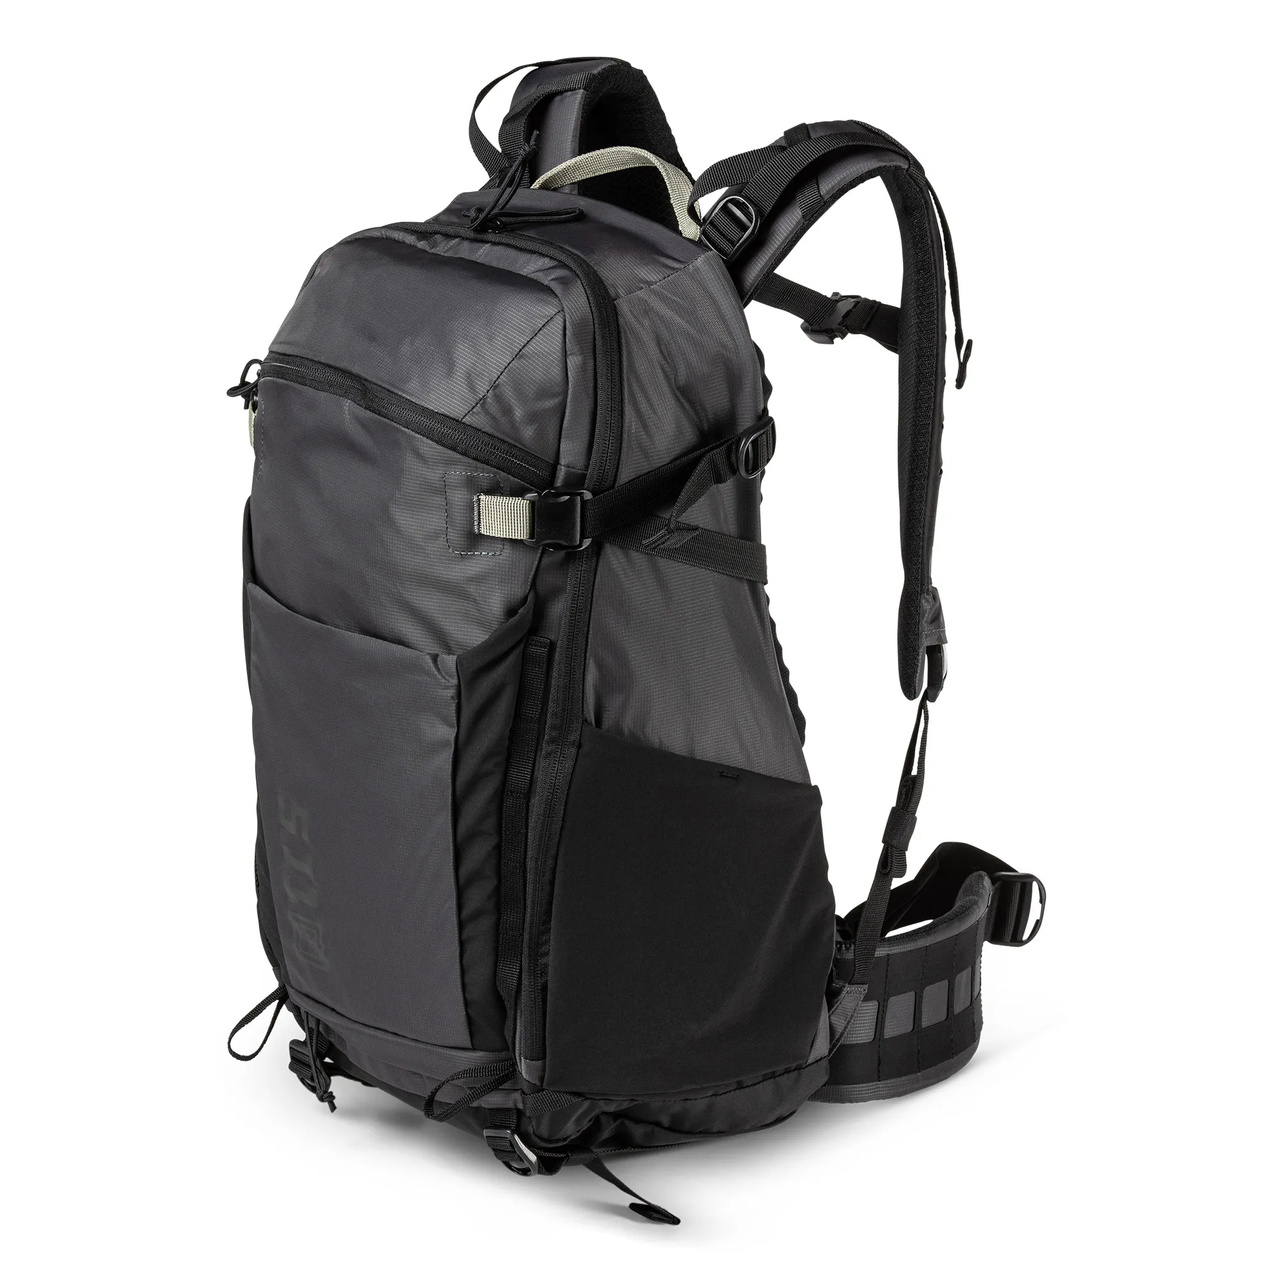 Skyweight 36L Pack Volcanic